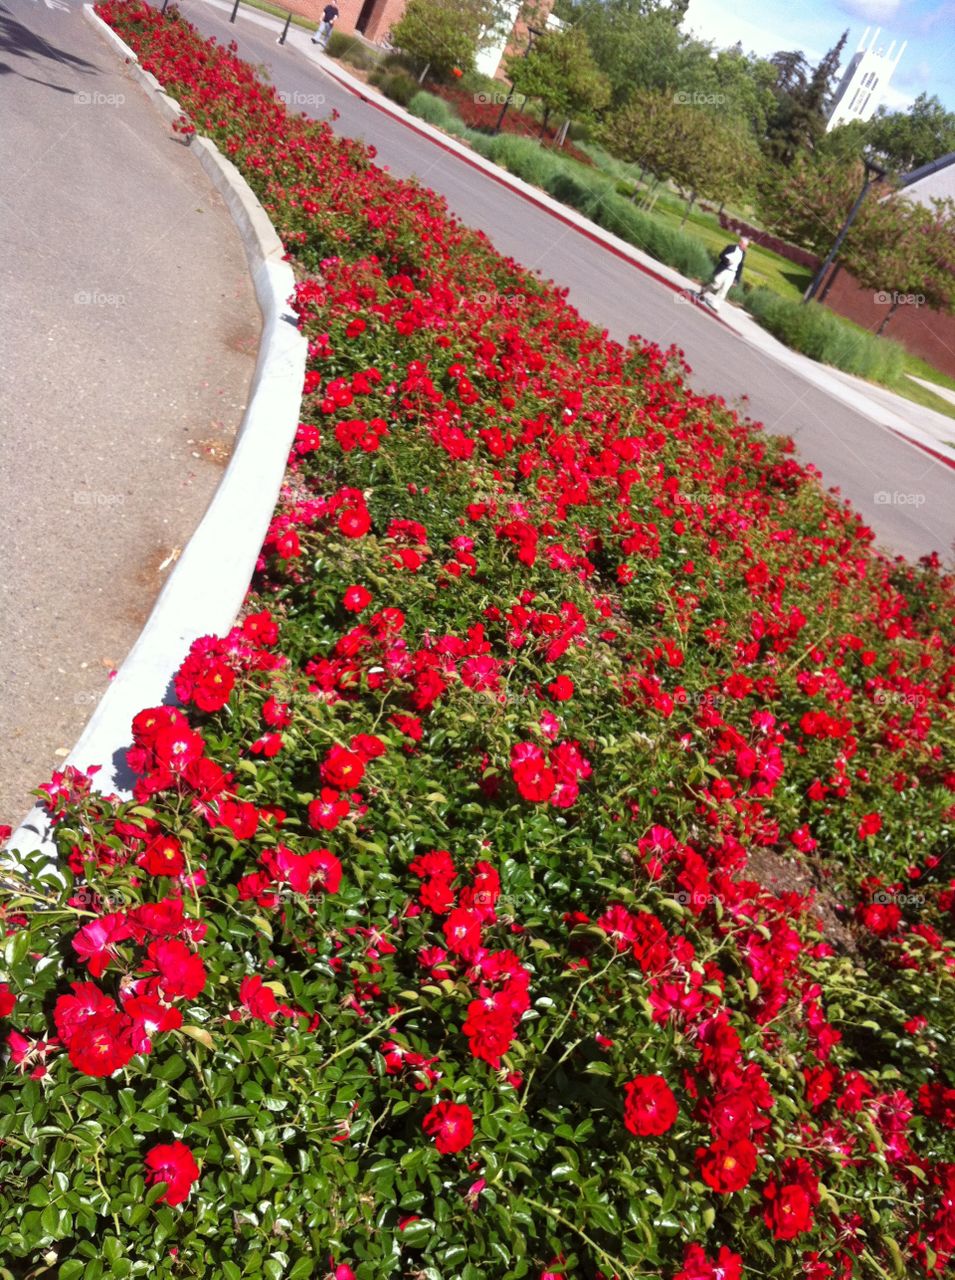 Roses in spring. Rose garden in Stockton university of the pacific near the river